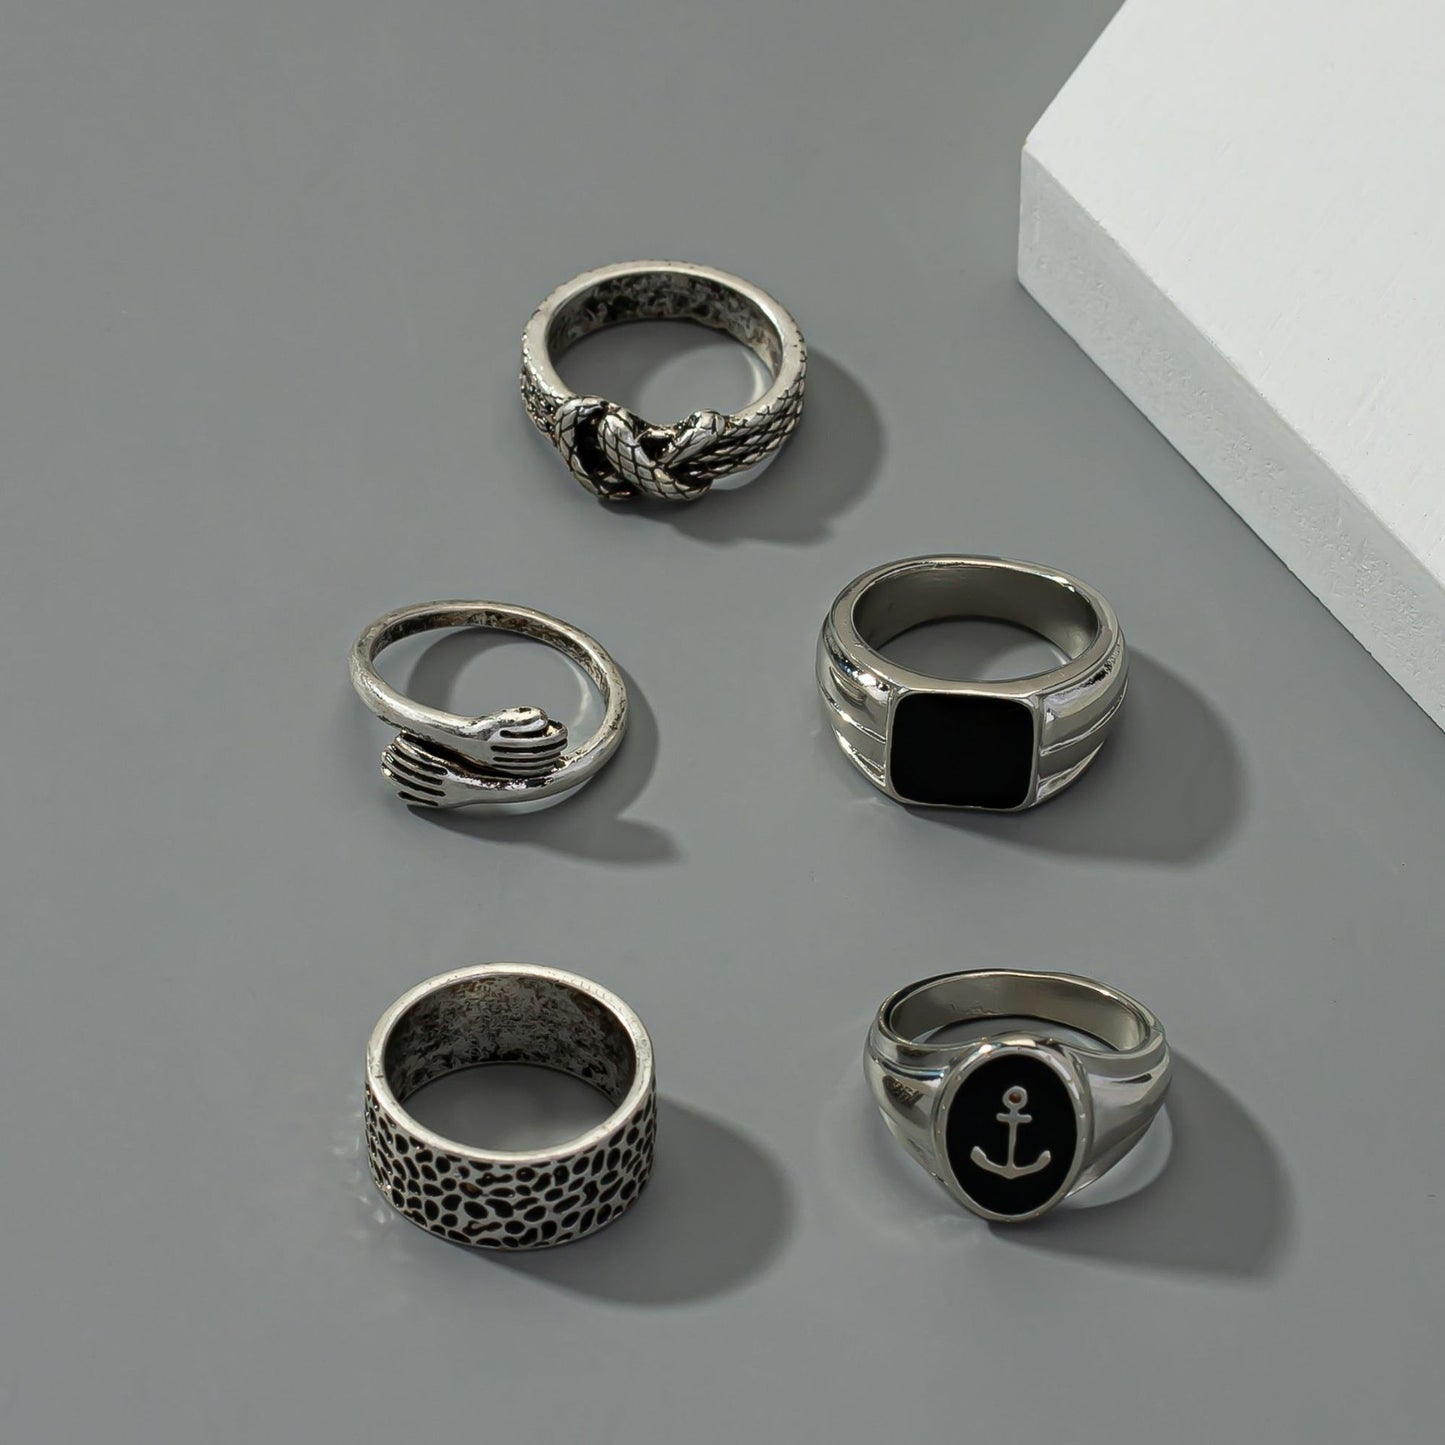 European and American Men's Ring Set with Instagram Bracelets - Planderful Vienna Verve Collection